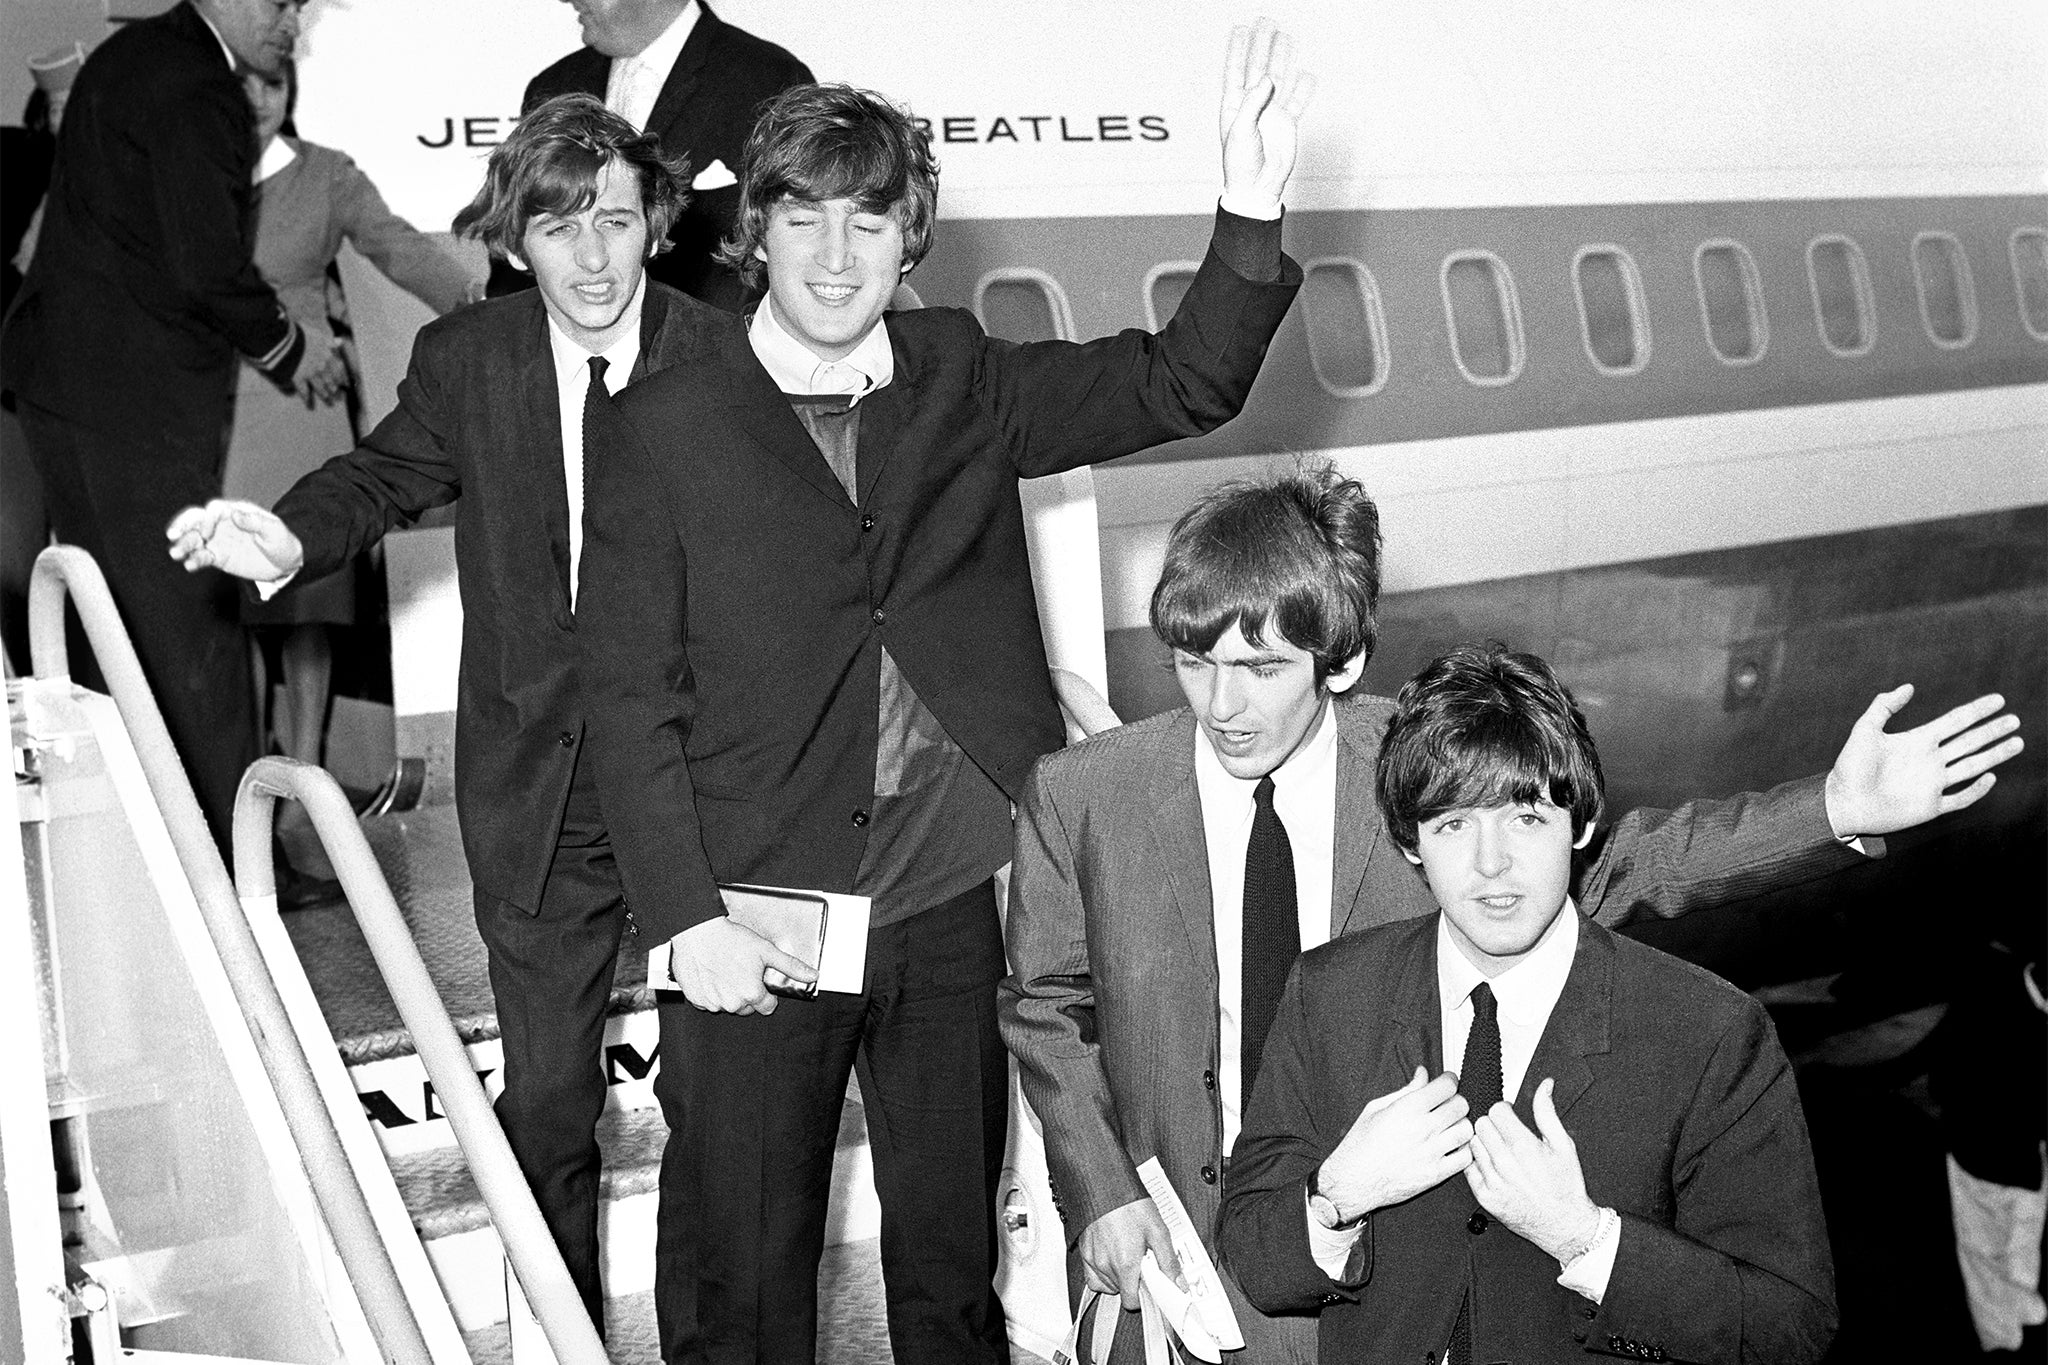 The Beatles: Photos From Their First Trip to America, 1964